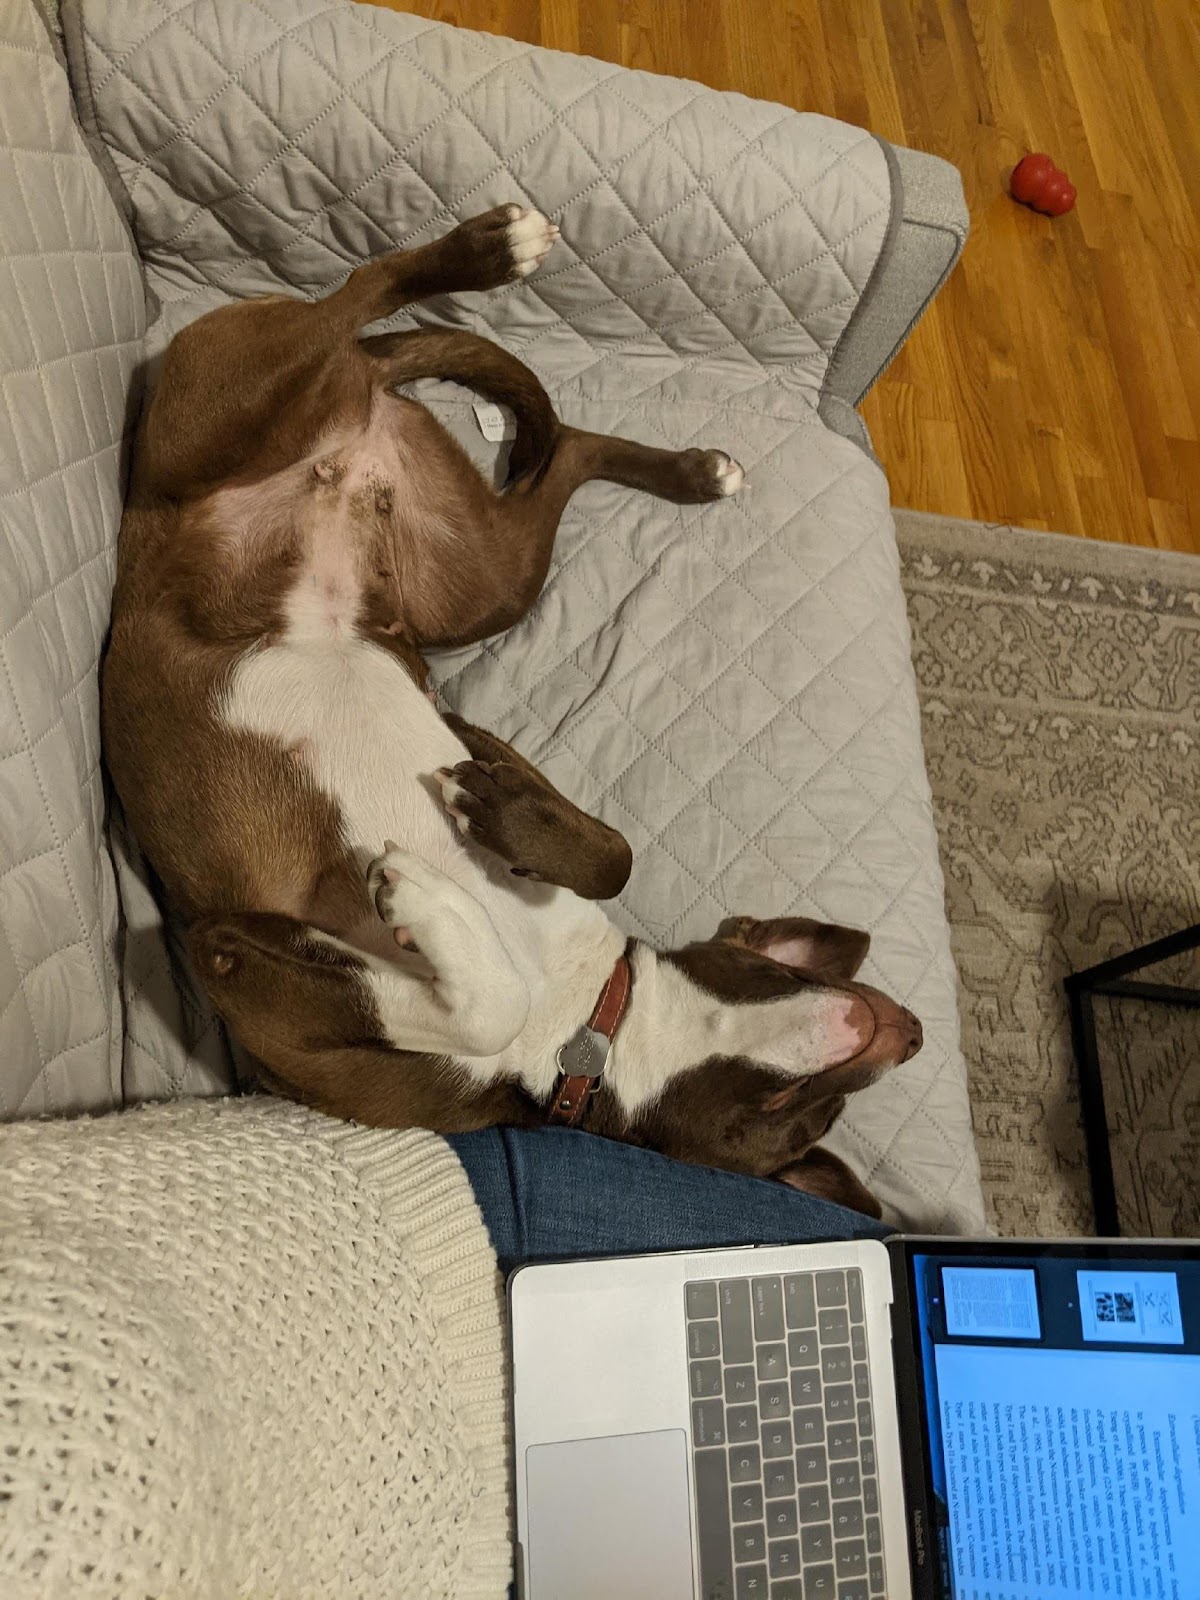 A dog lying on a couch

Description automatically generated with low confidence